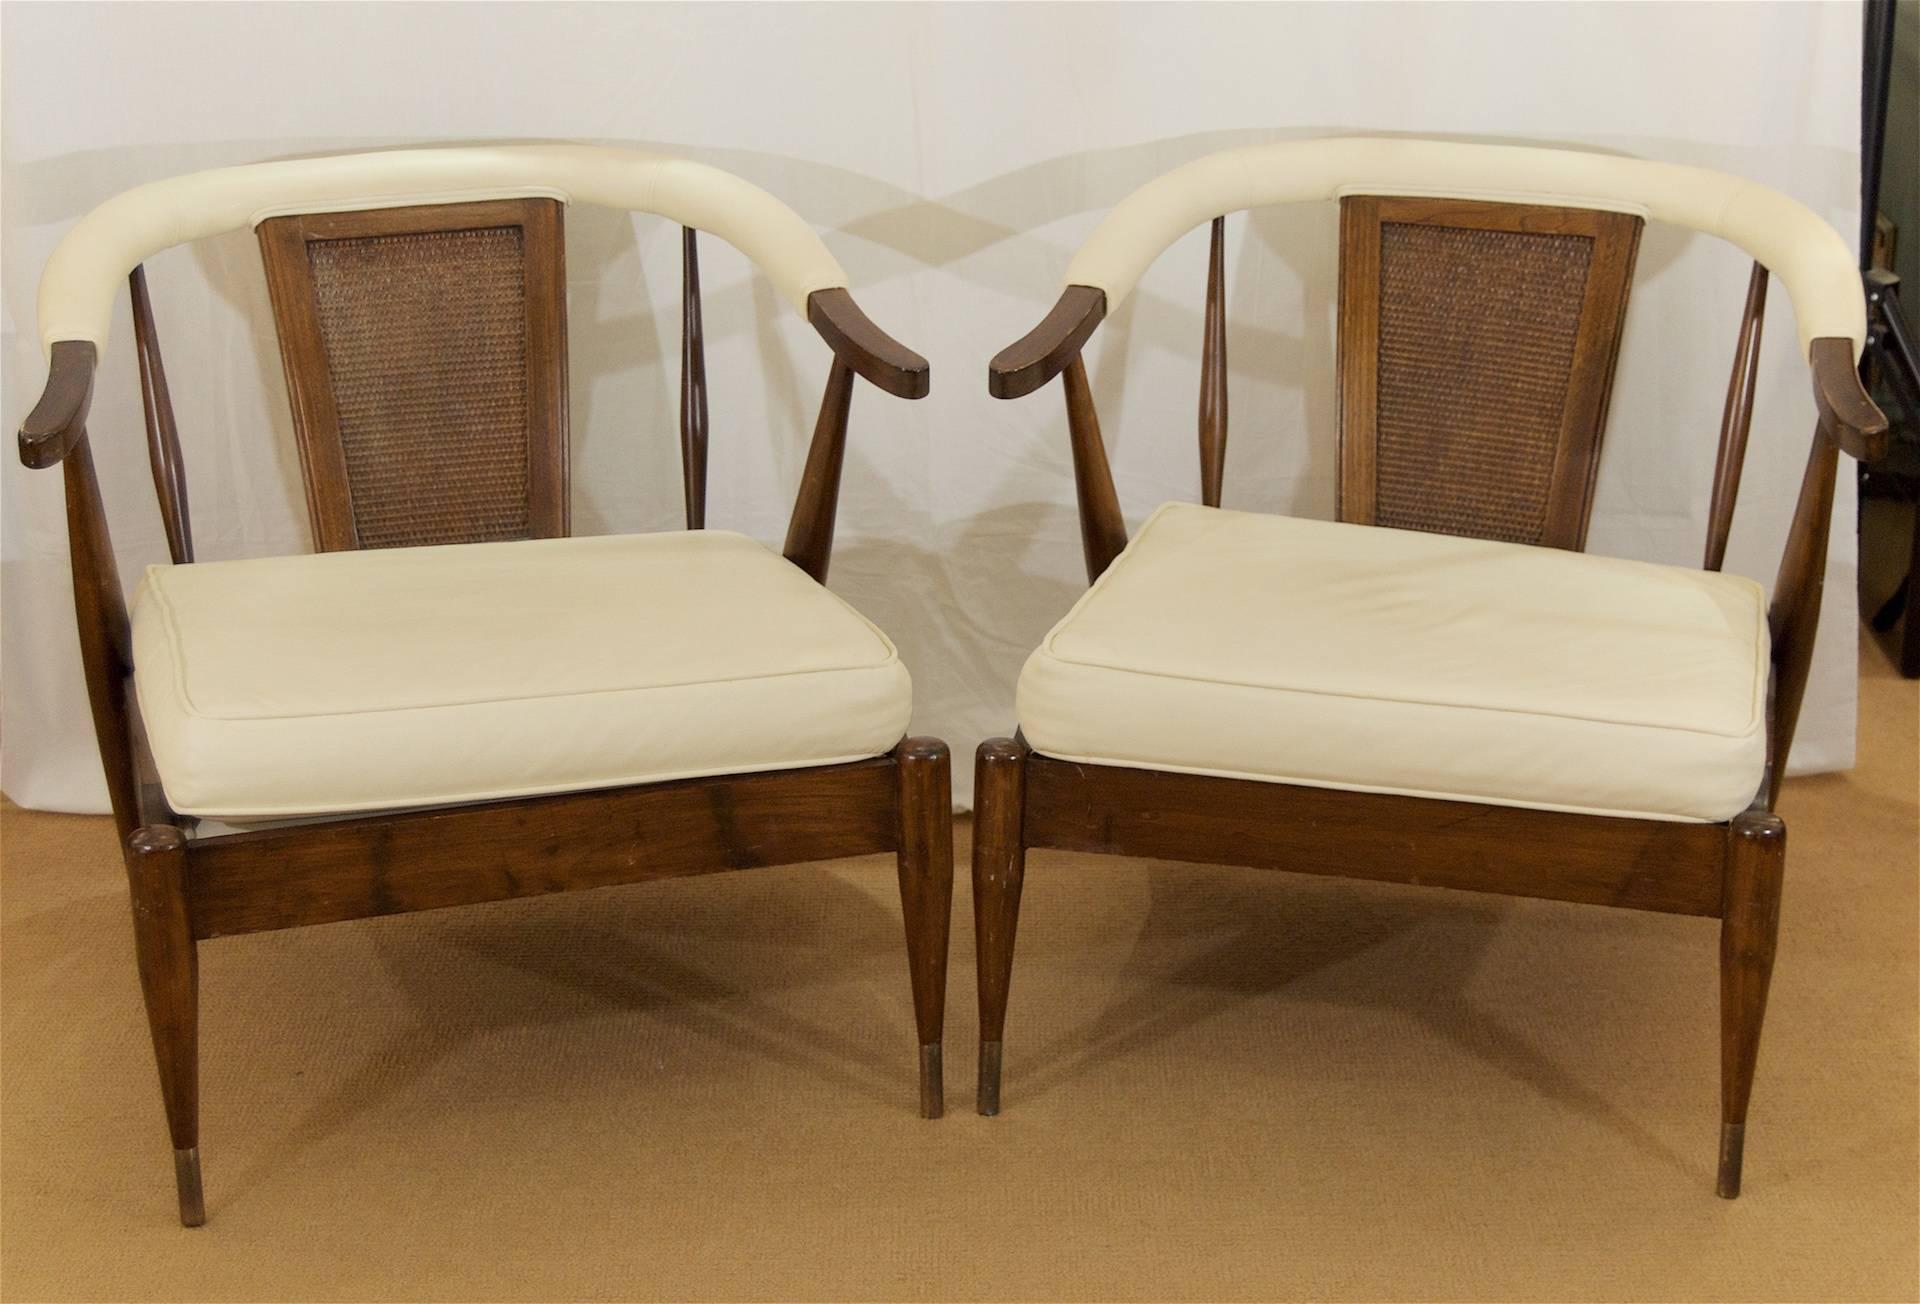 An excellent pair of well-proportioned lounge chairs with low-slung seats, the yoke-form walnut frames retaining their original finish. Brass sabot on front legs with age-appropriate patina. Upholstery is recent, in soft high-end faux cream leather.